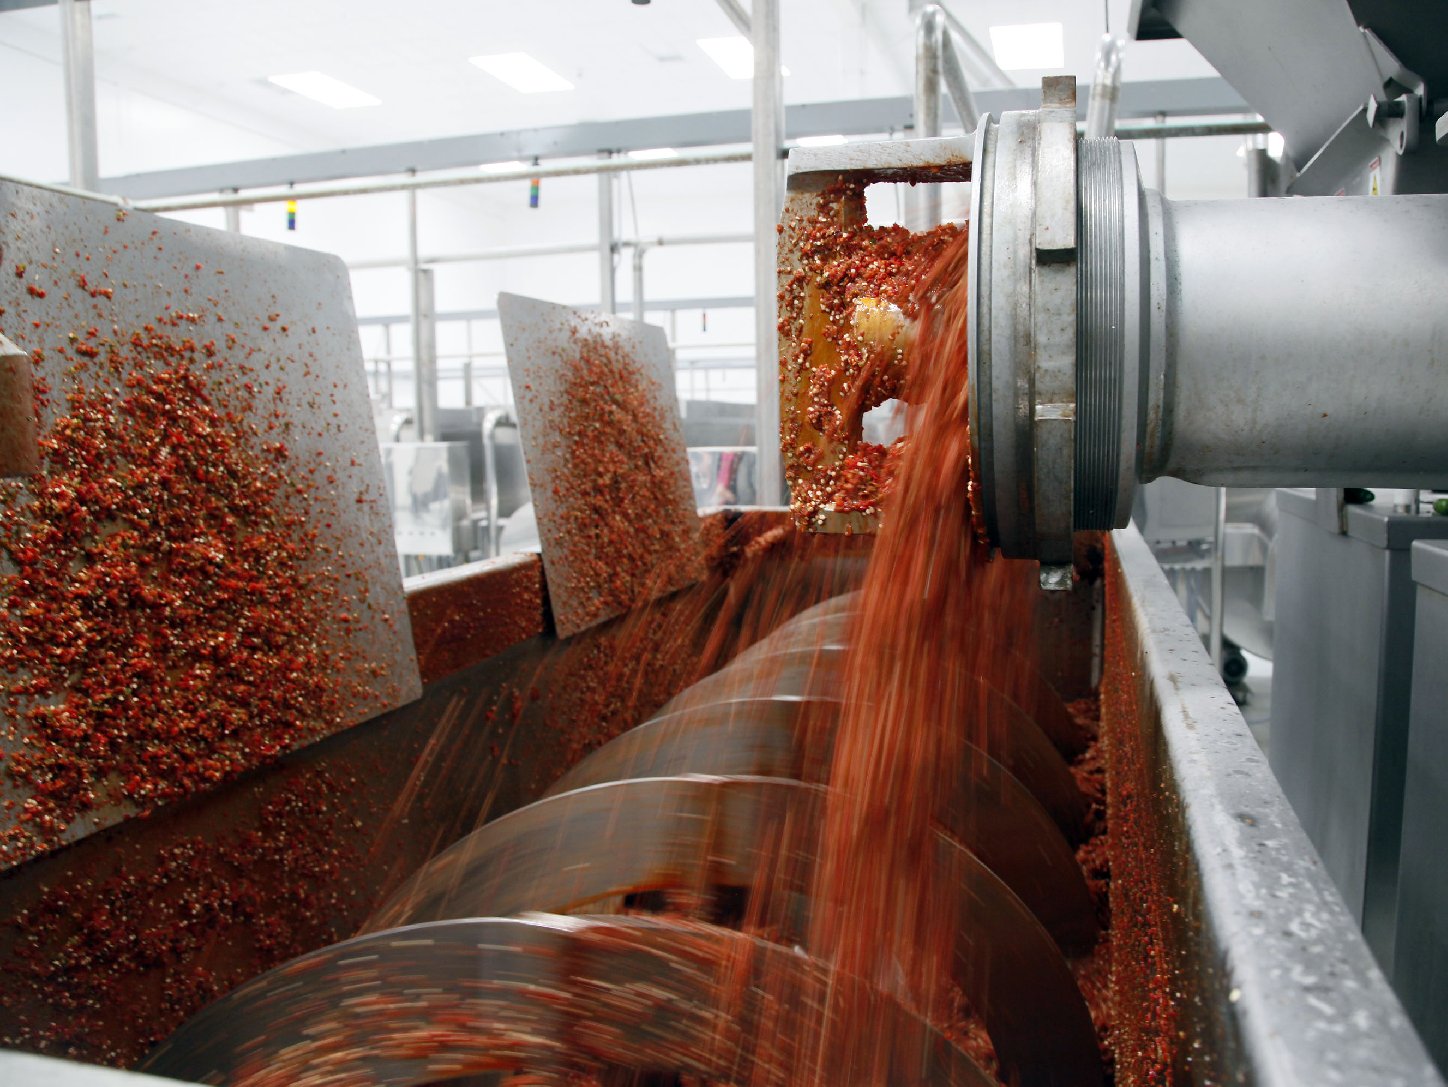 All heat and spice inside the Huy Fong Foods grinding rooms. Photo: Nick Ut/ASSOCIATED PRESS